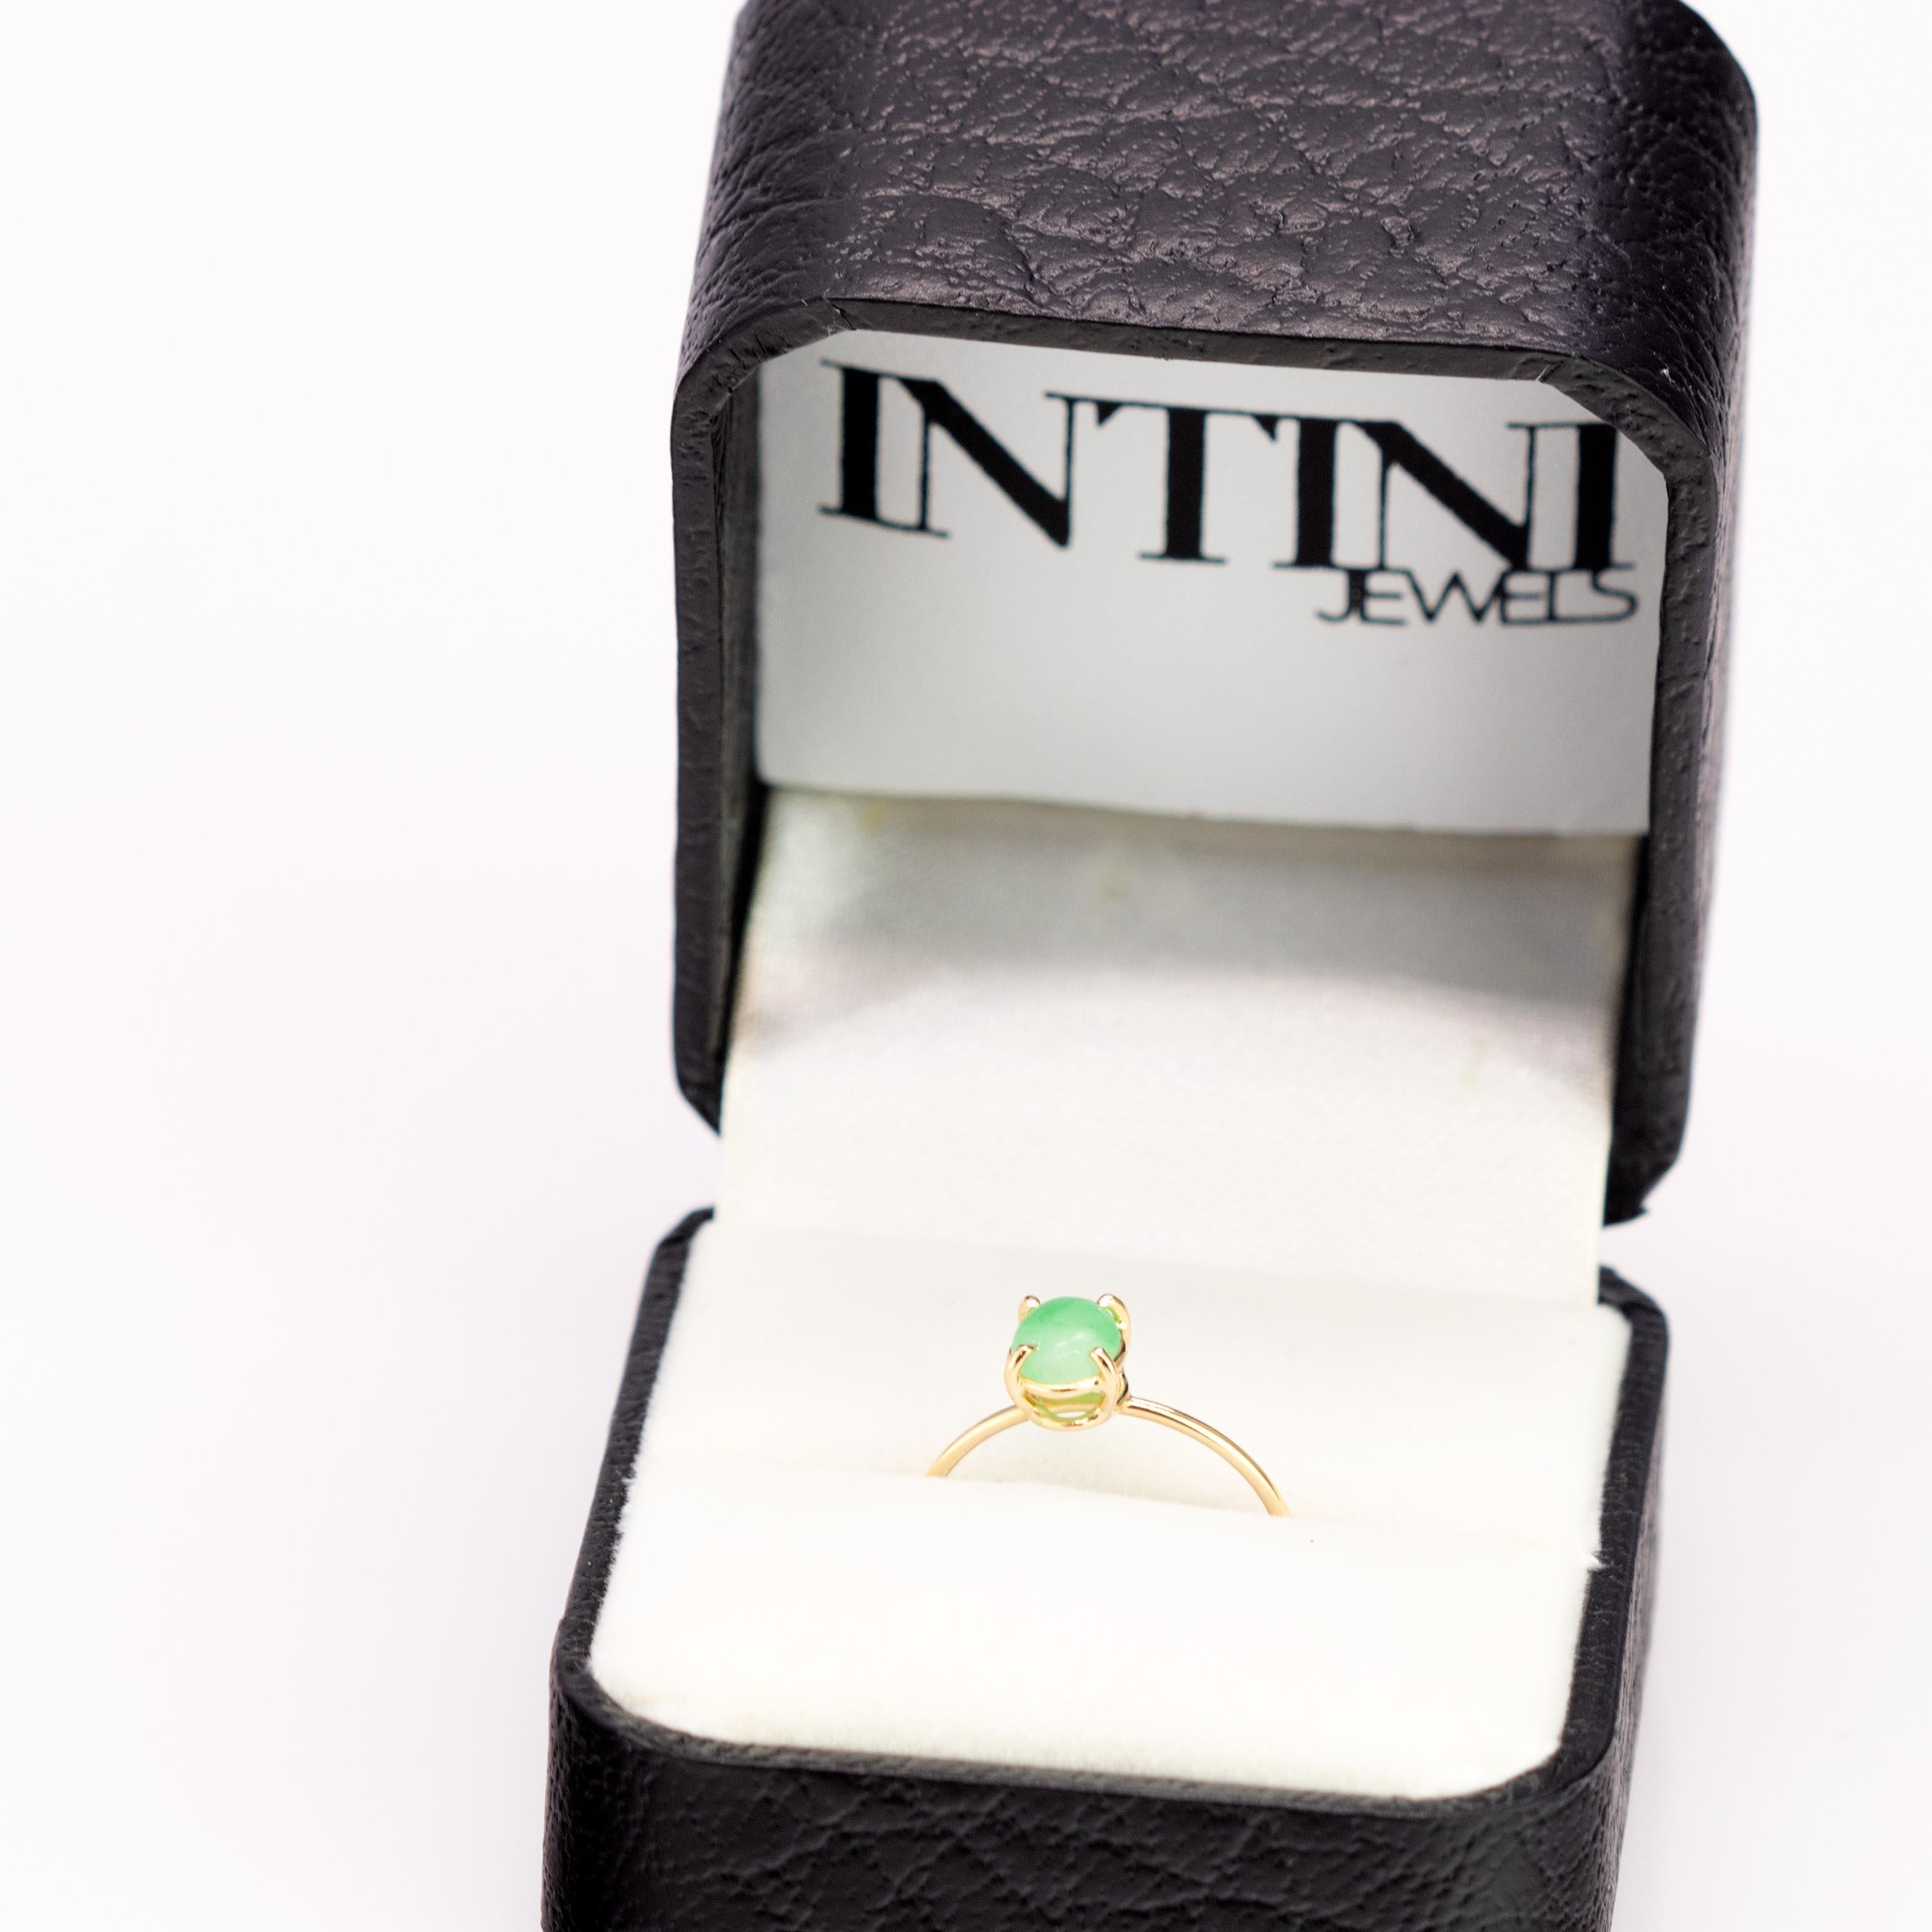 Art Nouveau Intini Jewels 0.7 Carat Jade 18 Karat Yellow Gold Solitaire Cocktail Oval Ring For Sale